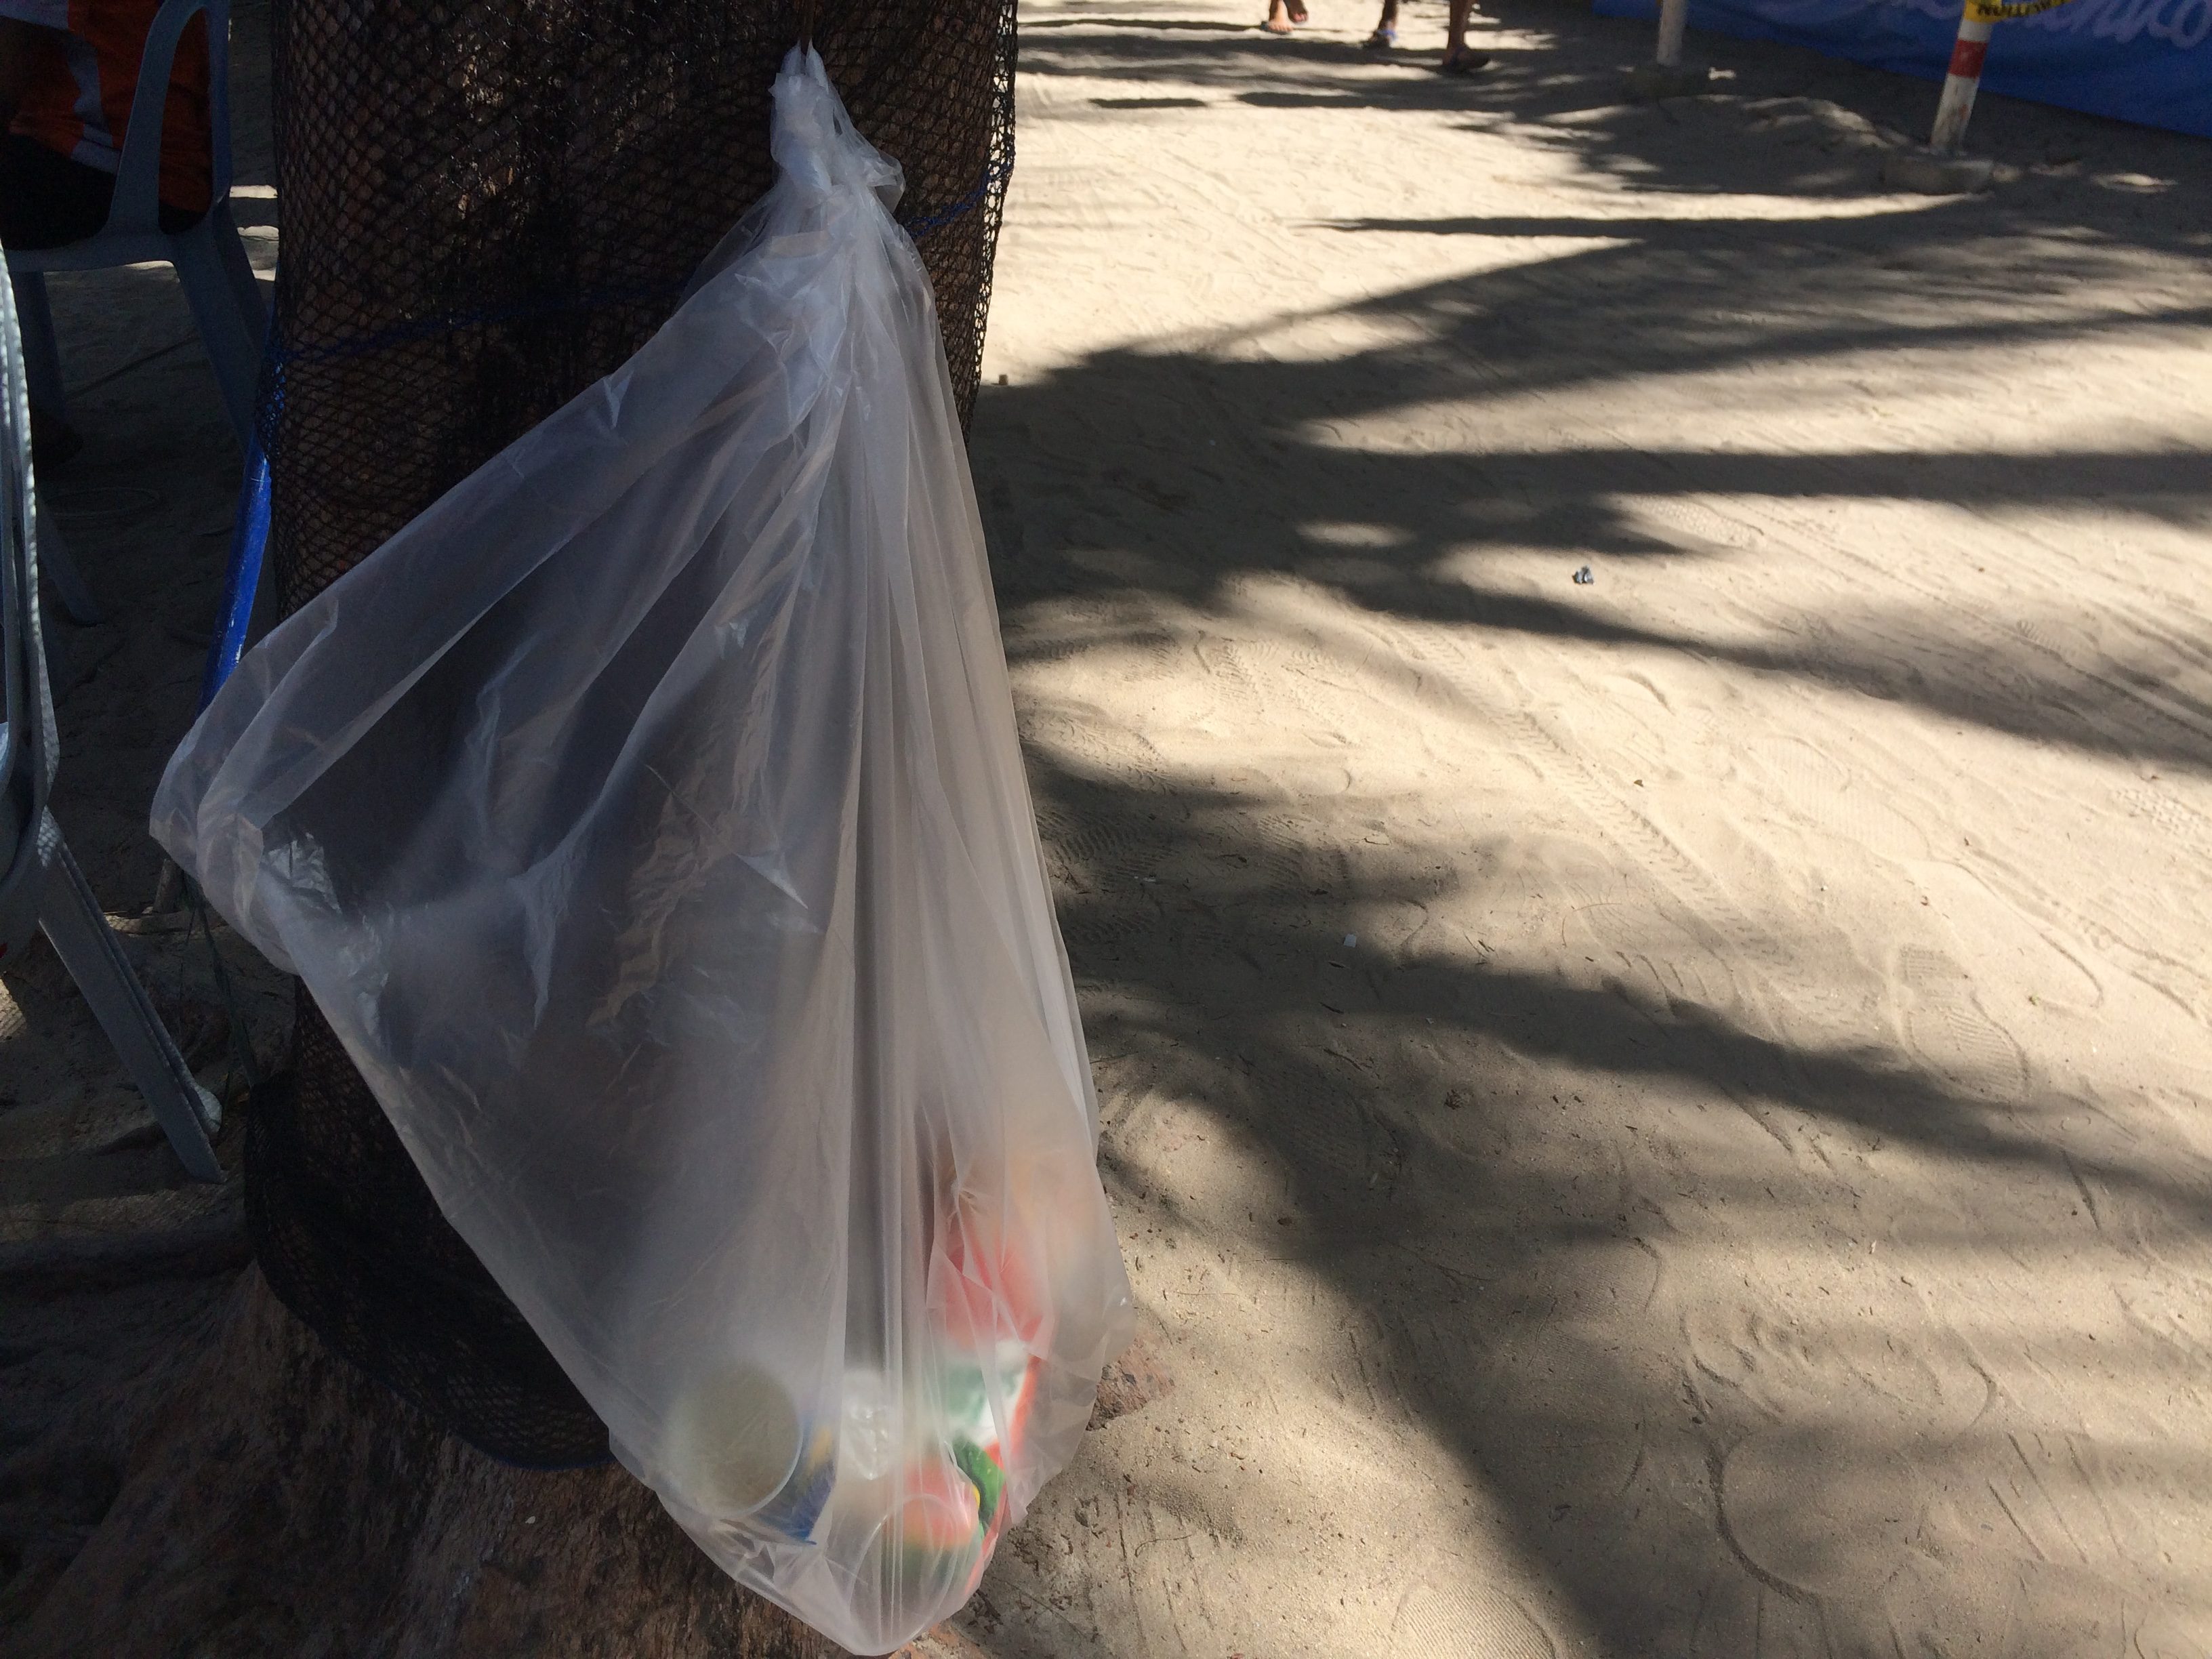 DISPOSE OF YOUR TRASH PROPERLY. Got trash? Watch out for trash bags and bins around the resort.   